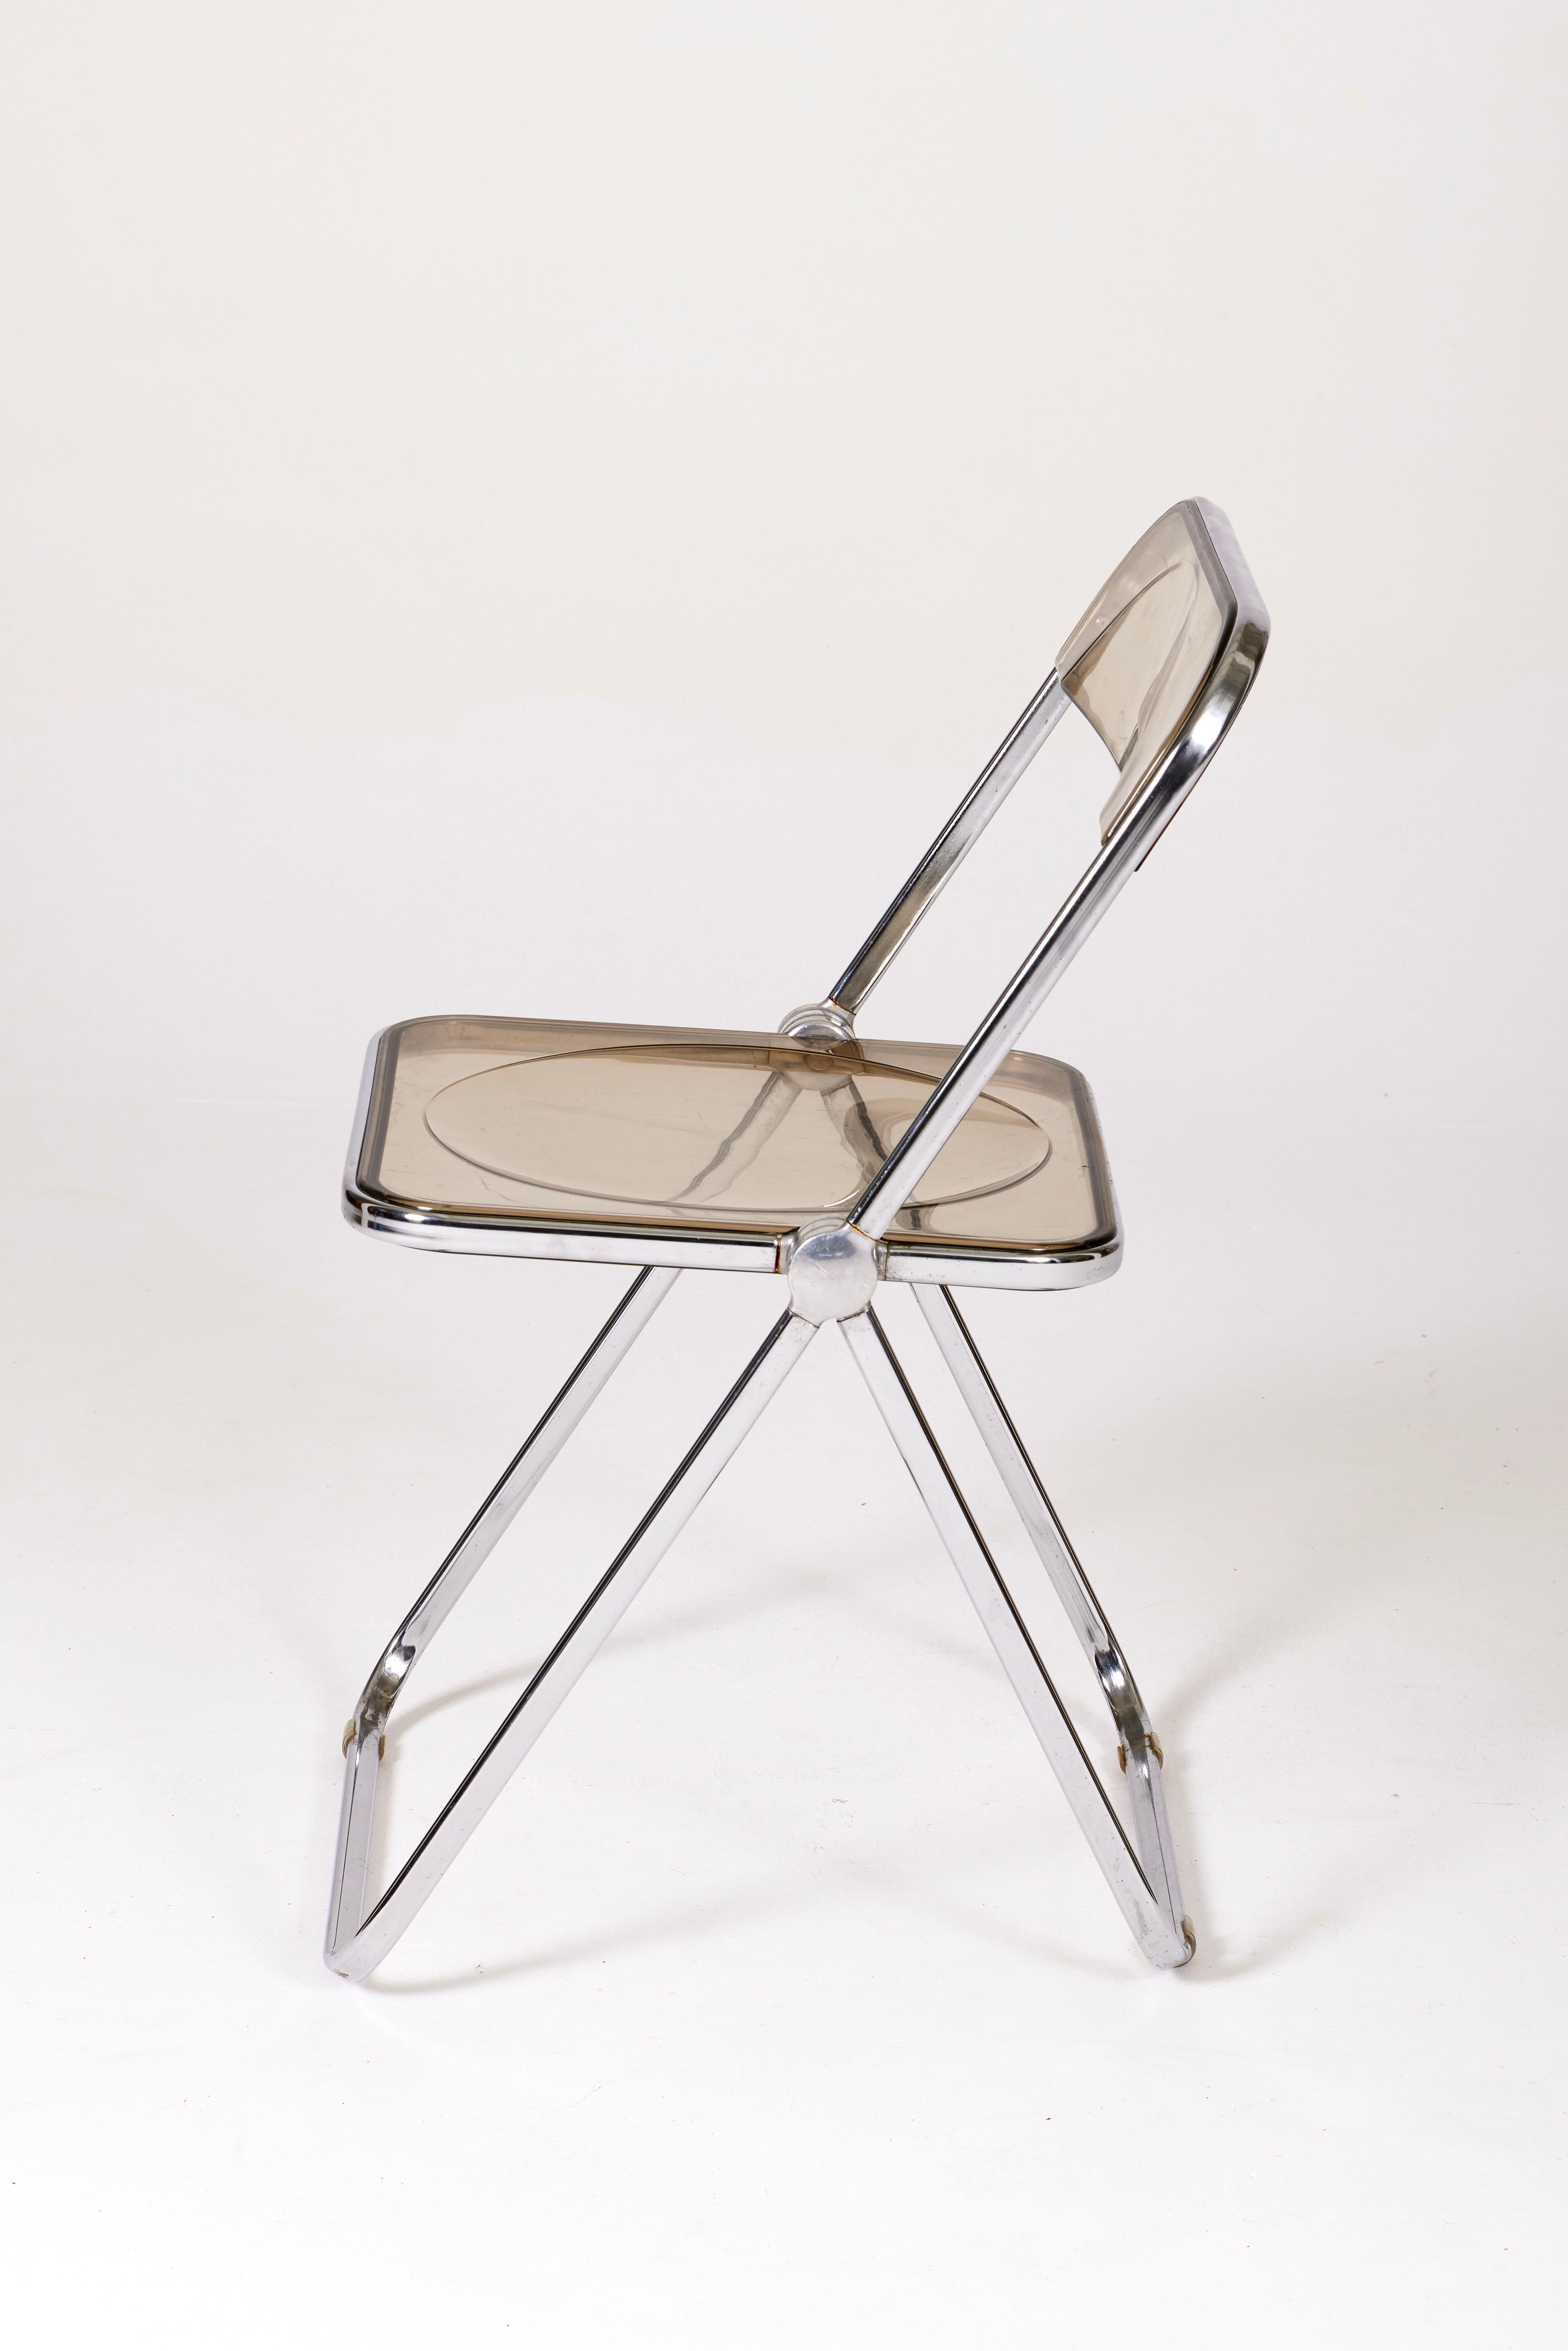 20th Century Vintage Acrylic Glass and Chromed Metal Folding Chair, 1970s